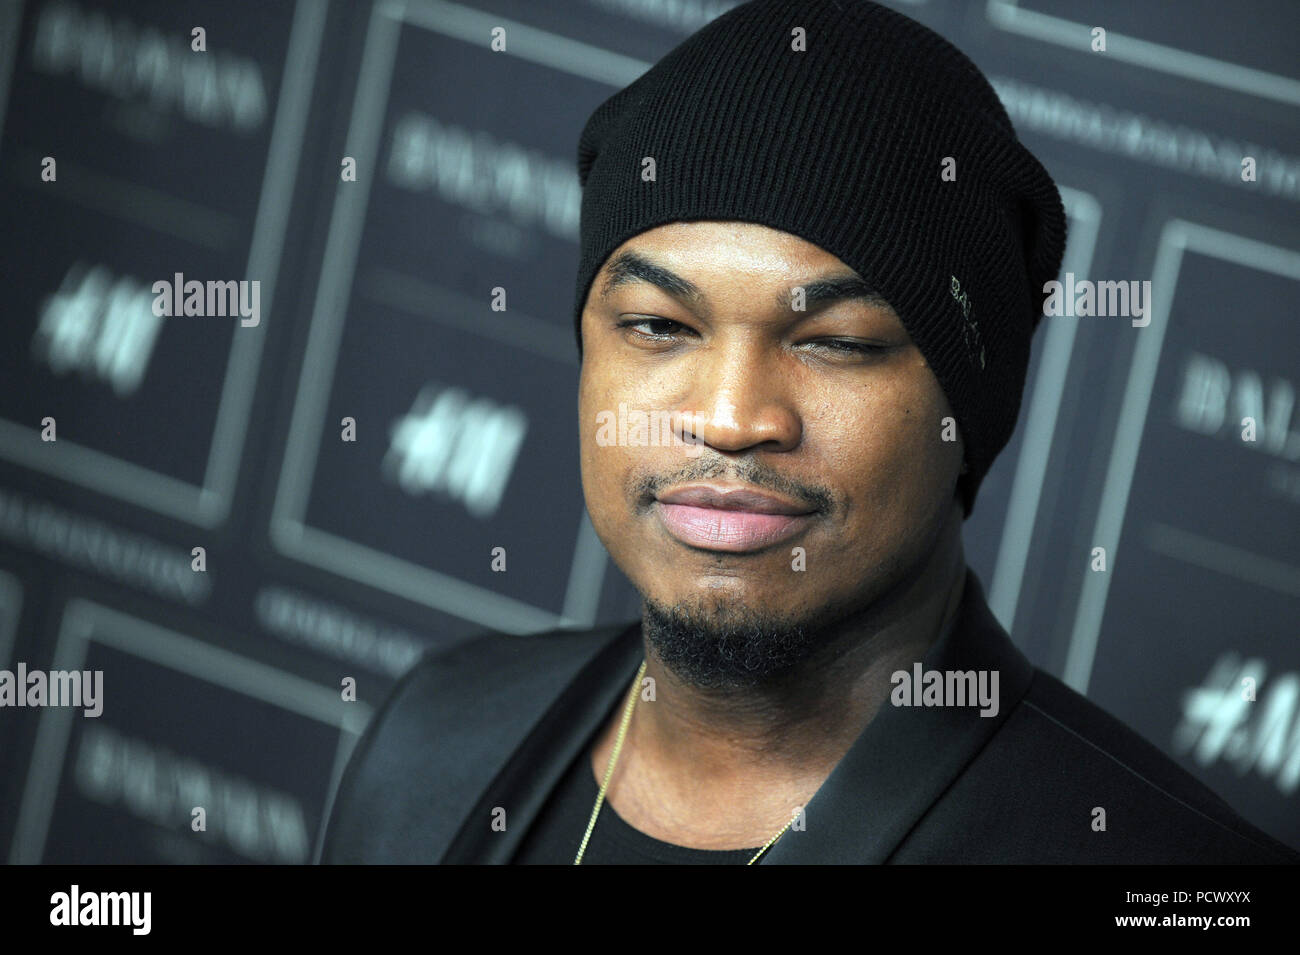 NEW YORK, NY - OCTOBER 20: Ne-Yo at the BALMAIN X H&M collection launch  event at 23 Wall Street on October 20, 2015 in New York City. People: Ne-Yo  Stock Photo - Alamy